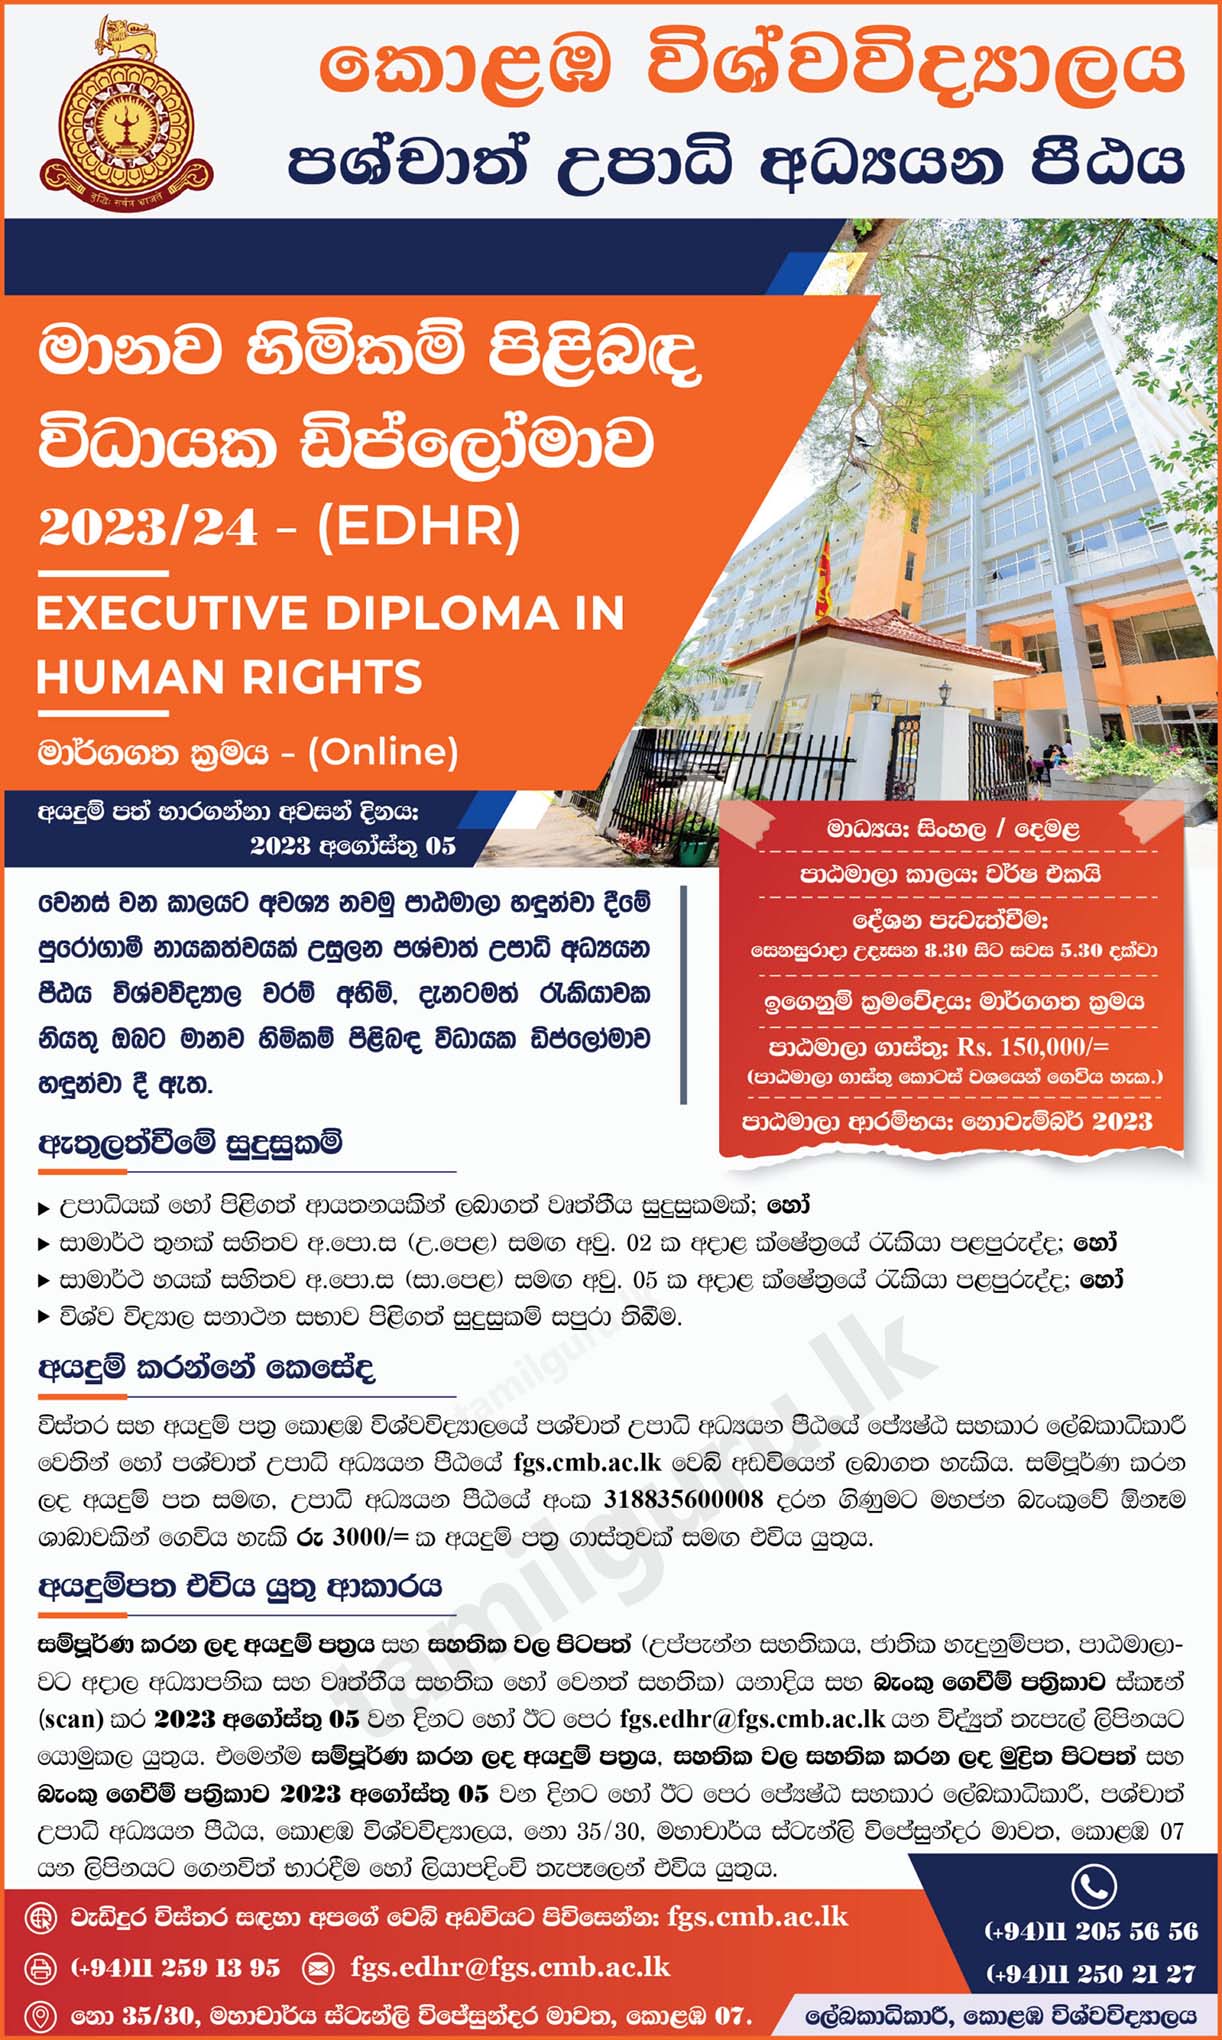 Executive Diploma in Human Rights 2023/24 - University of Colombo